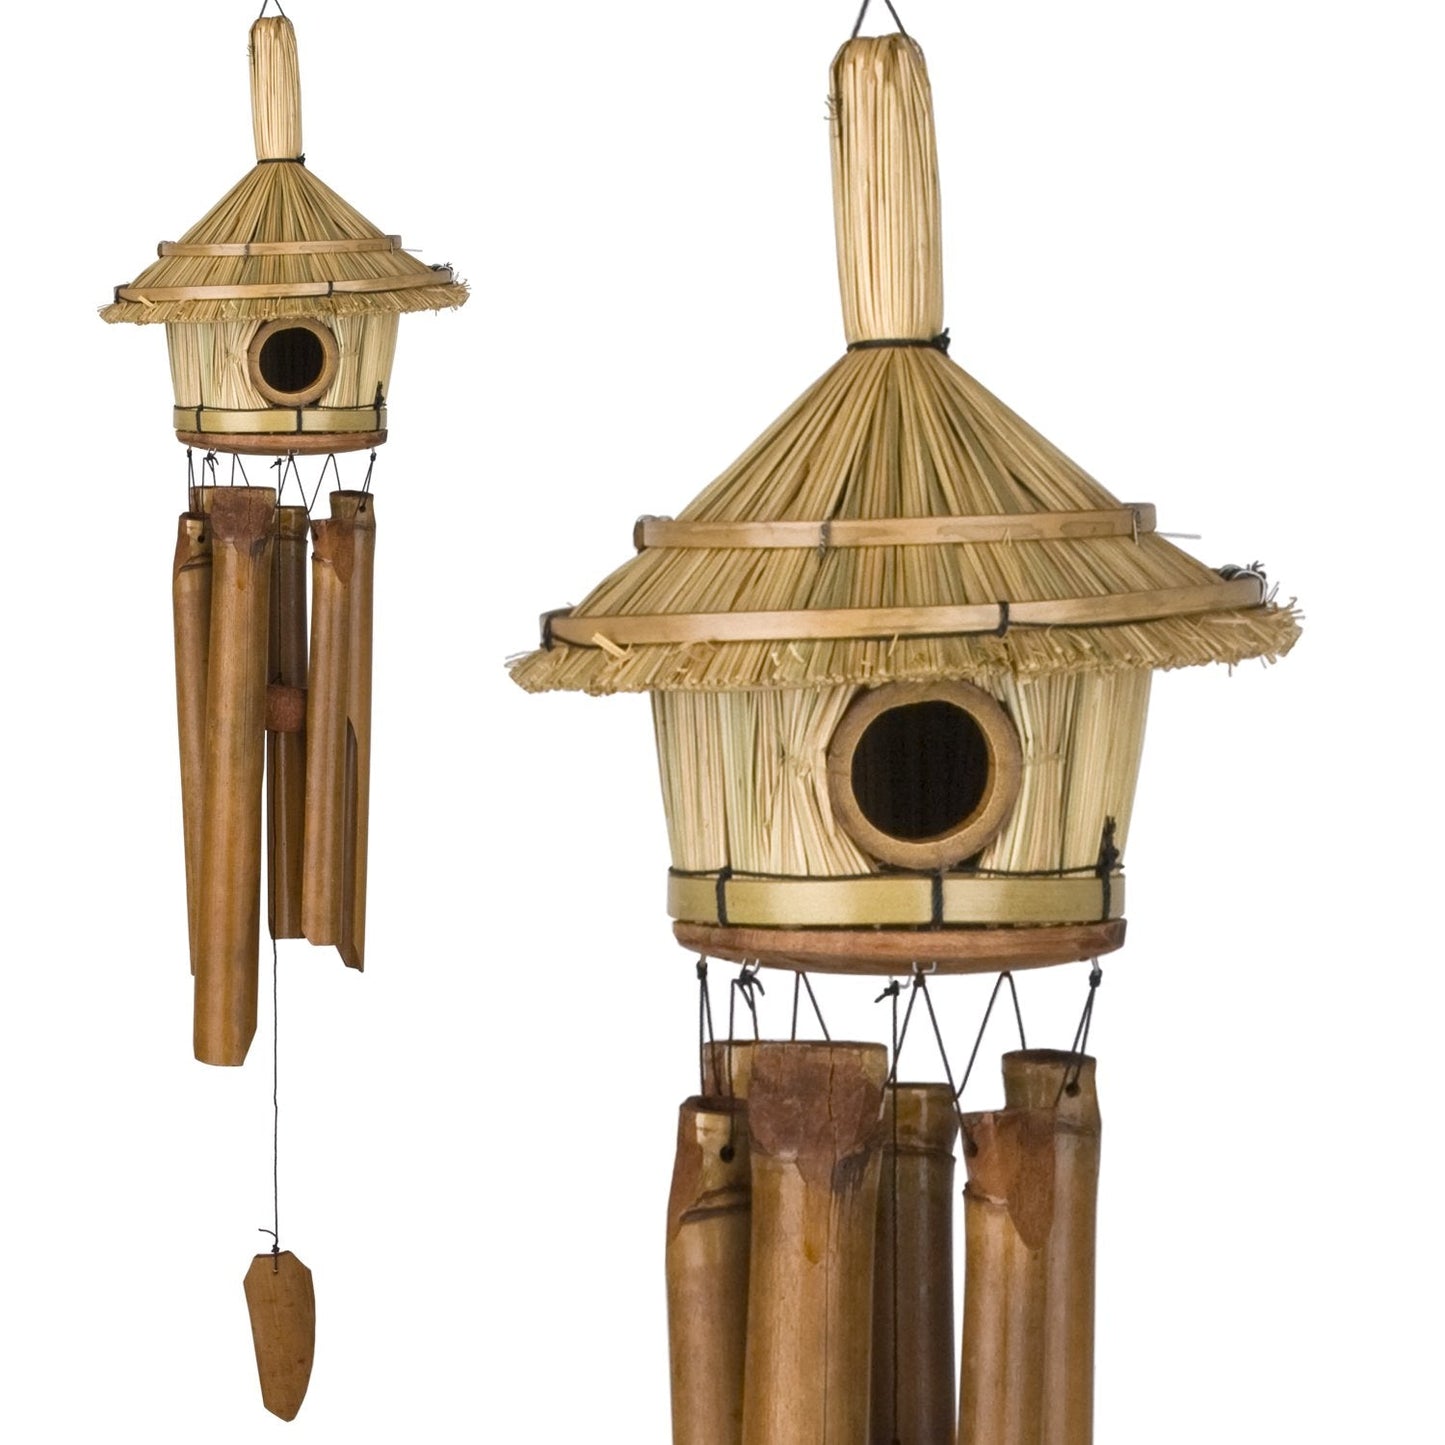 Thatched Roof Birdhouse Bamboo Chime - by Woodstock Chimes